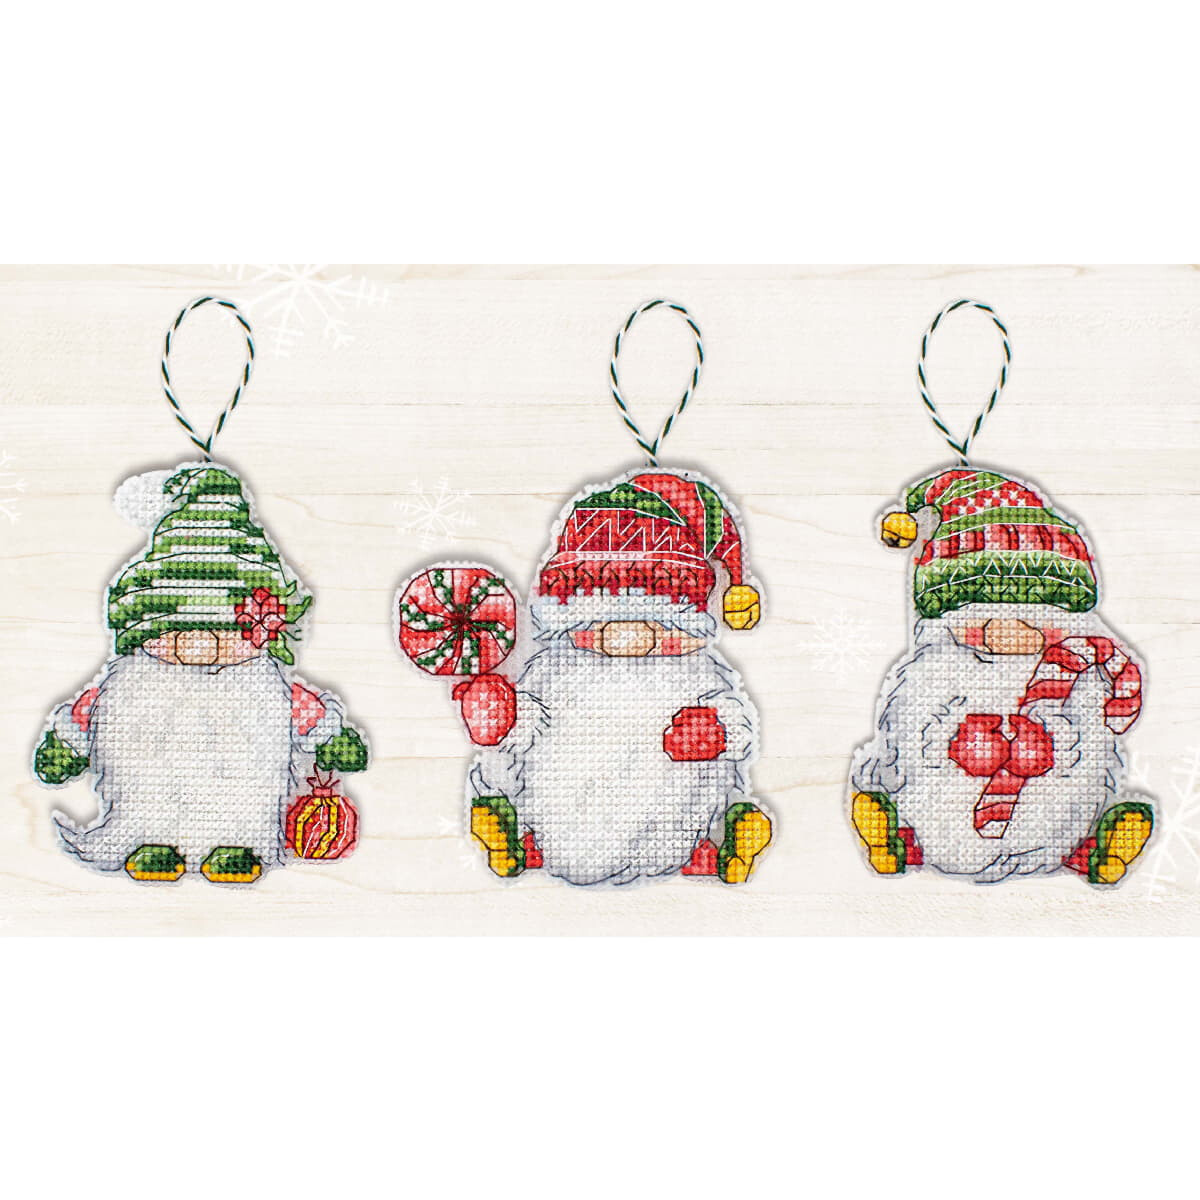 Three festive gnome ornaments are displayed in a row....